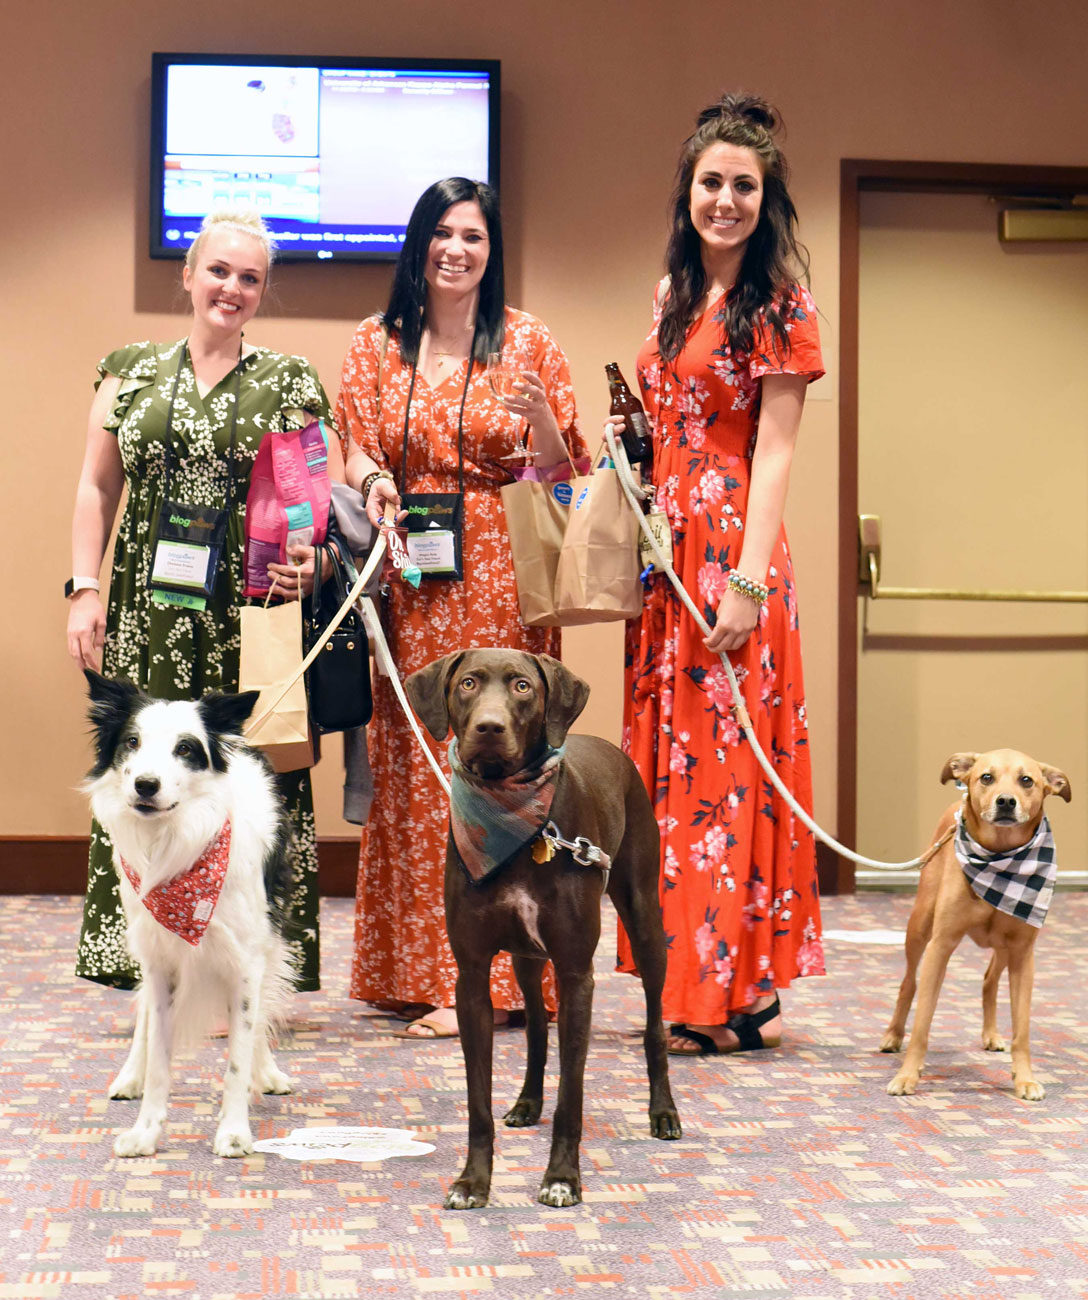 Have you ever been curious about what happens a pet blogging conference? Here is a list of what I'm calling "The Four S's" of attending the BlogPaws conference: Sponsors, Sessions, Swag, and Socialization.